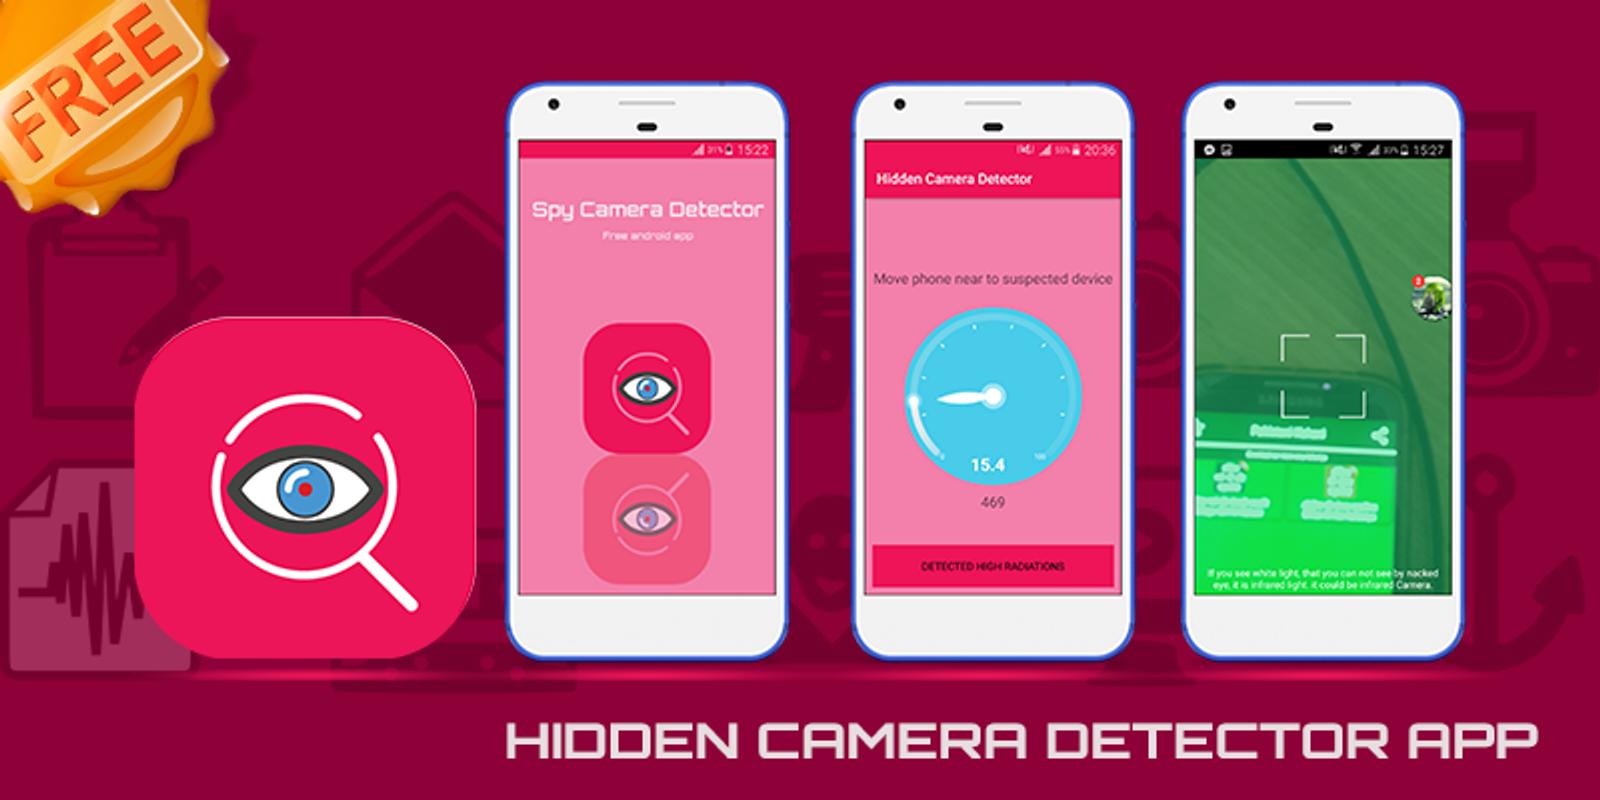 spy camera detector app for android free download